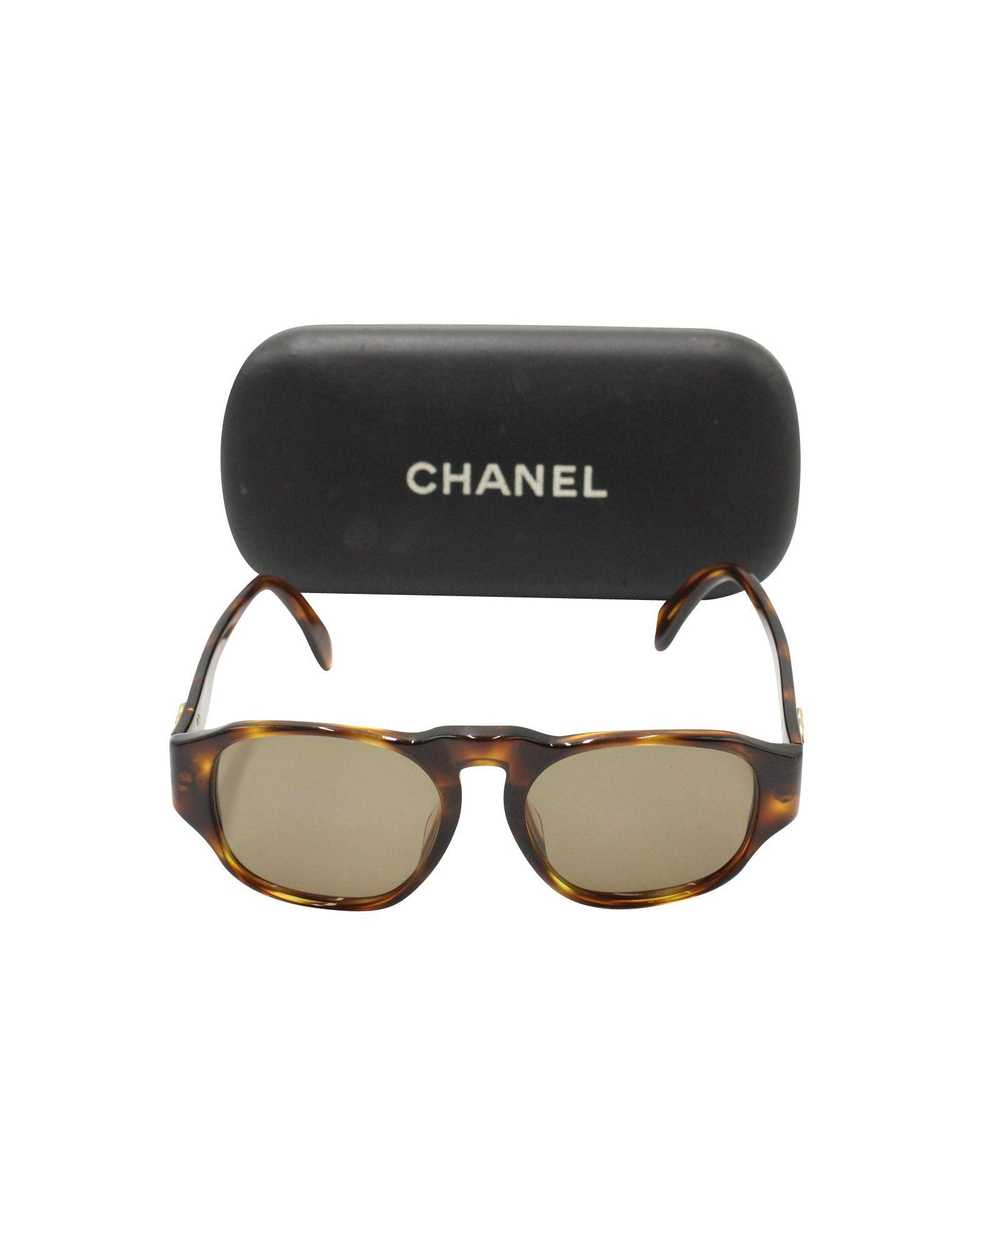 Product Details Chanel Tortoise Shell Sunglasses - image 7